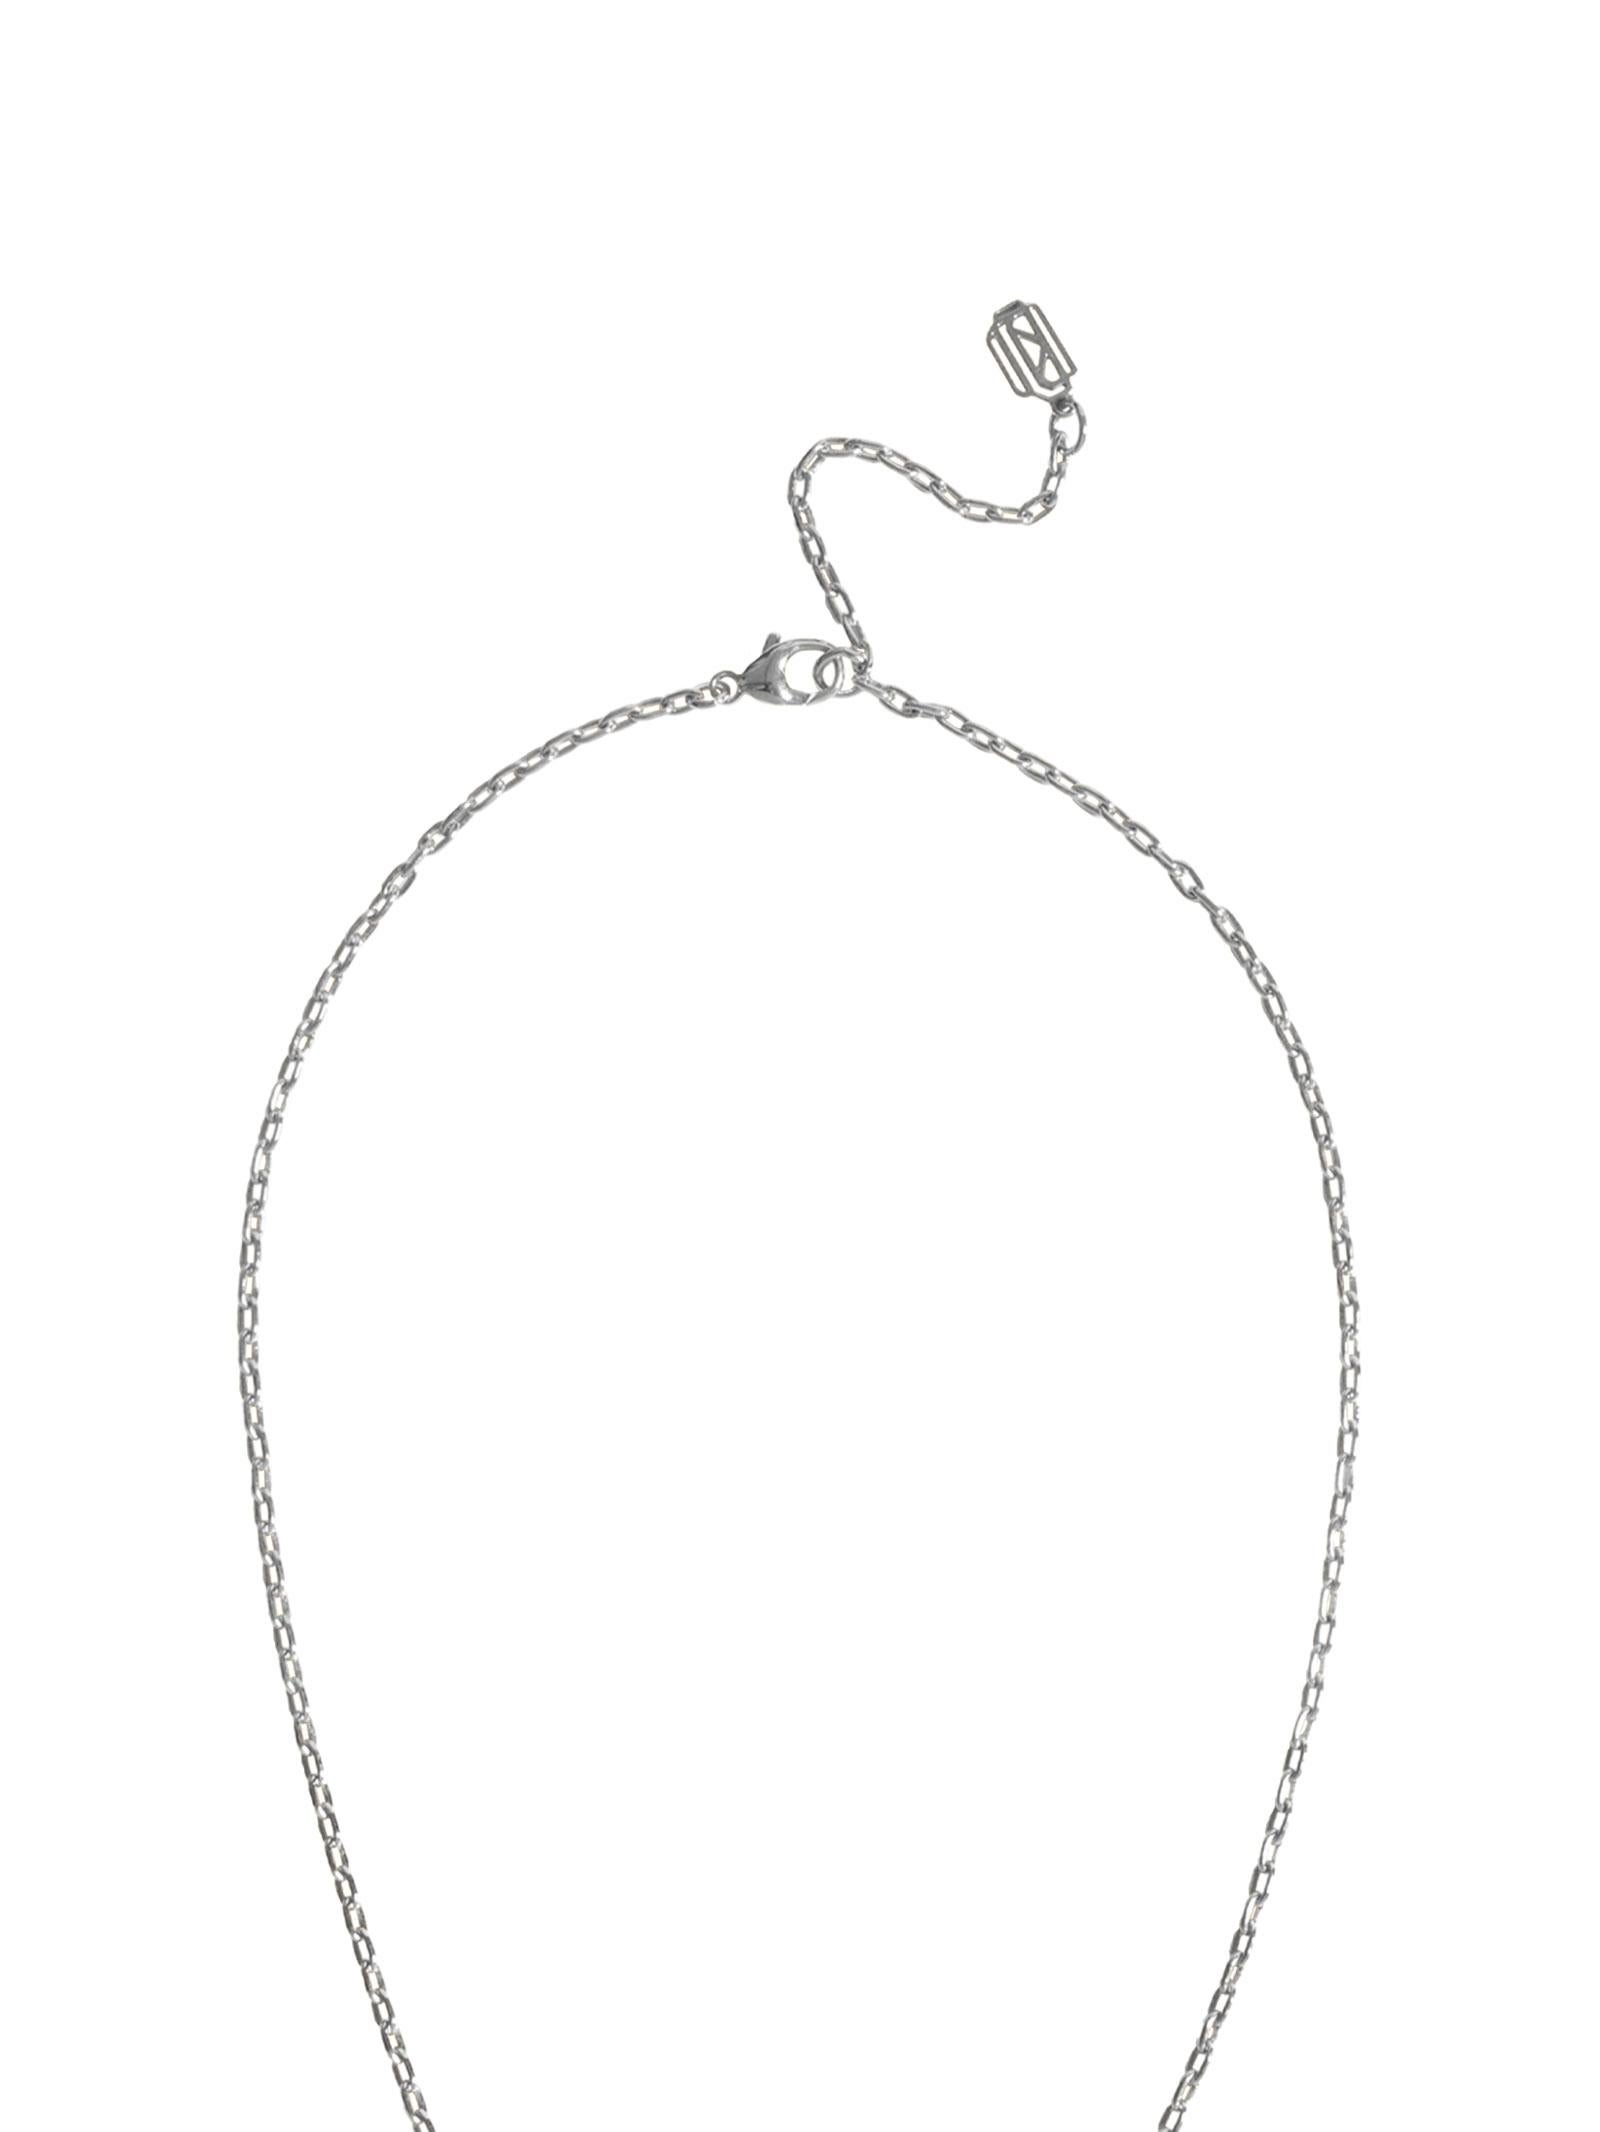 Amanti Chain-Linked Necklace with two hexagon pendant hand-crafted in 18-karat white gold

DETAILS
The Amanti Lariat Chain Necklace by Angie Marei features a long 18-karat white gold chain with Gothic-era style hexagonal pendants - the sacred